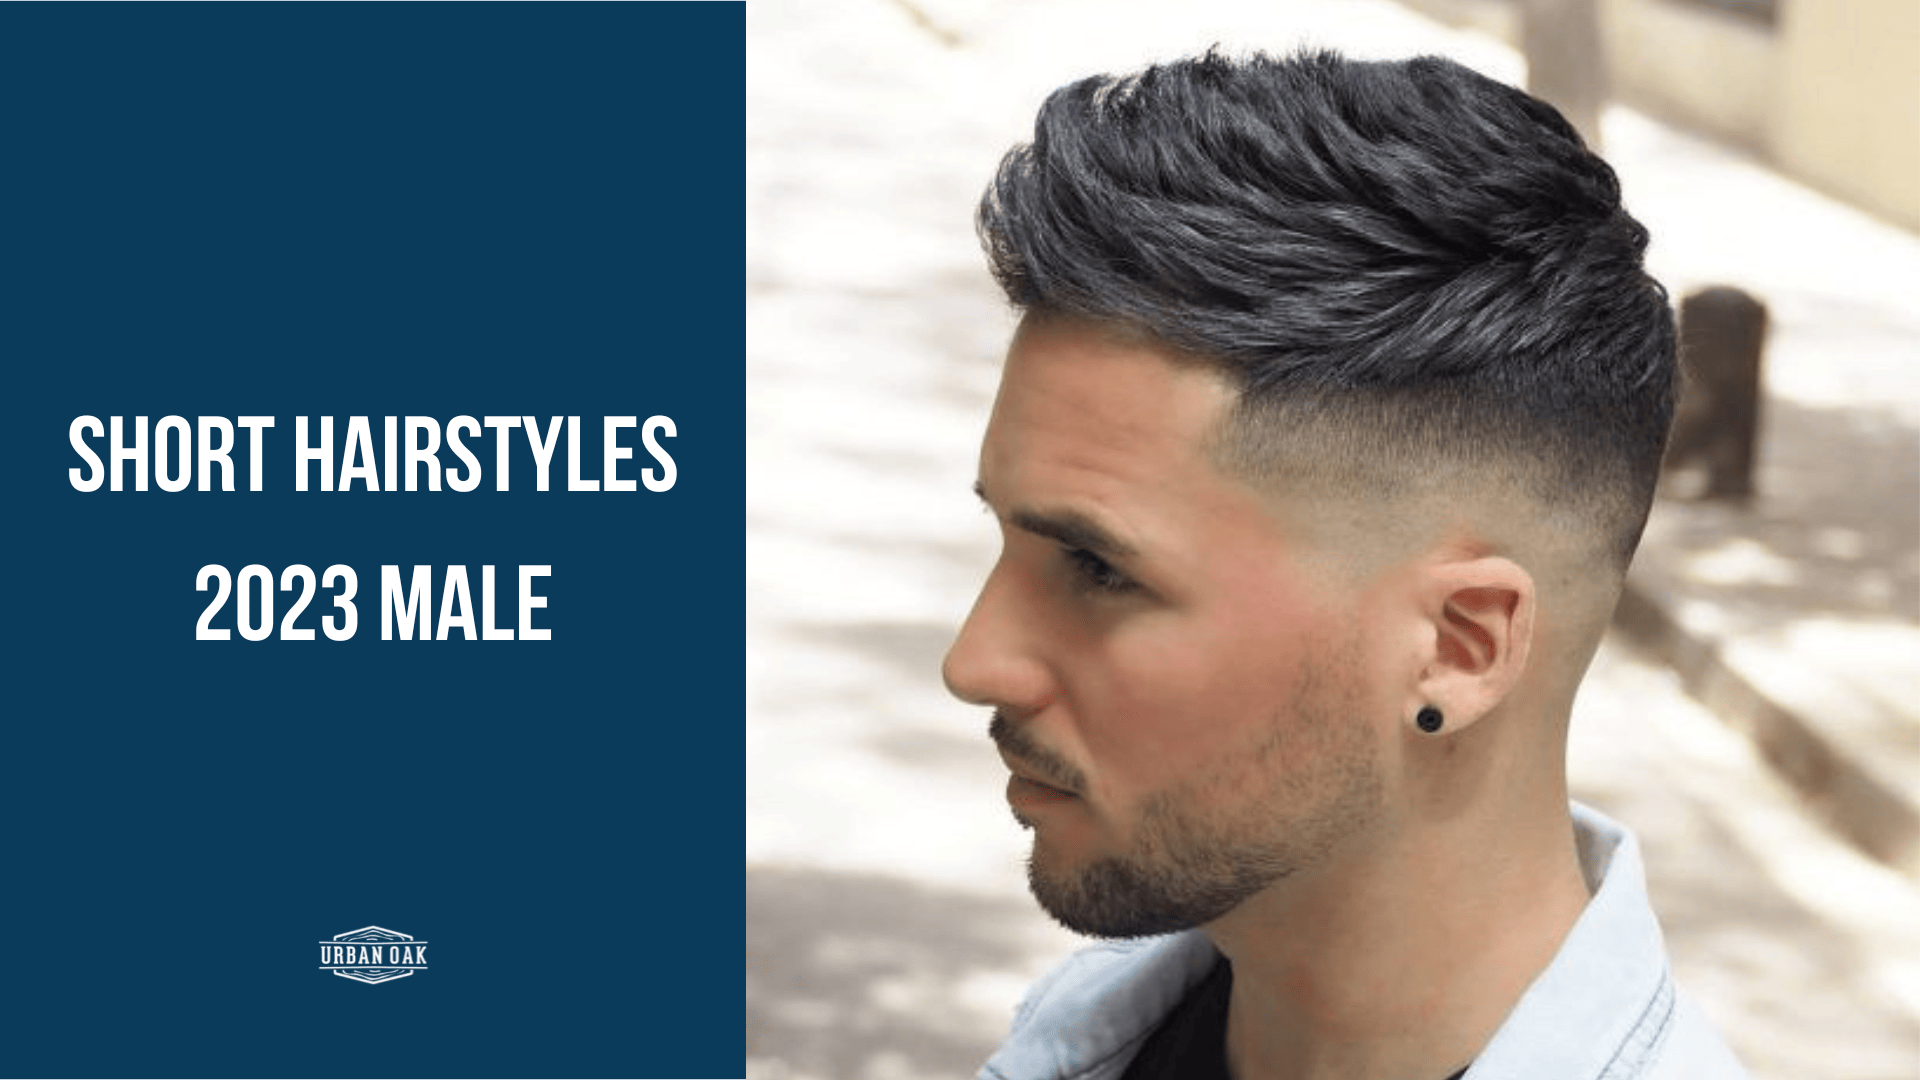 Short Hairstyles 2023 Male